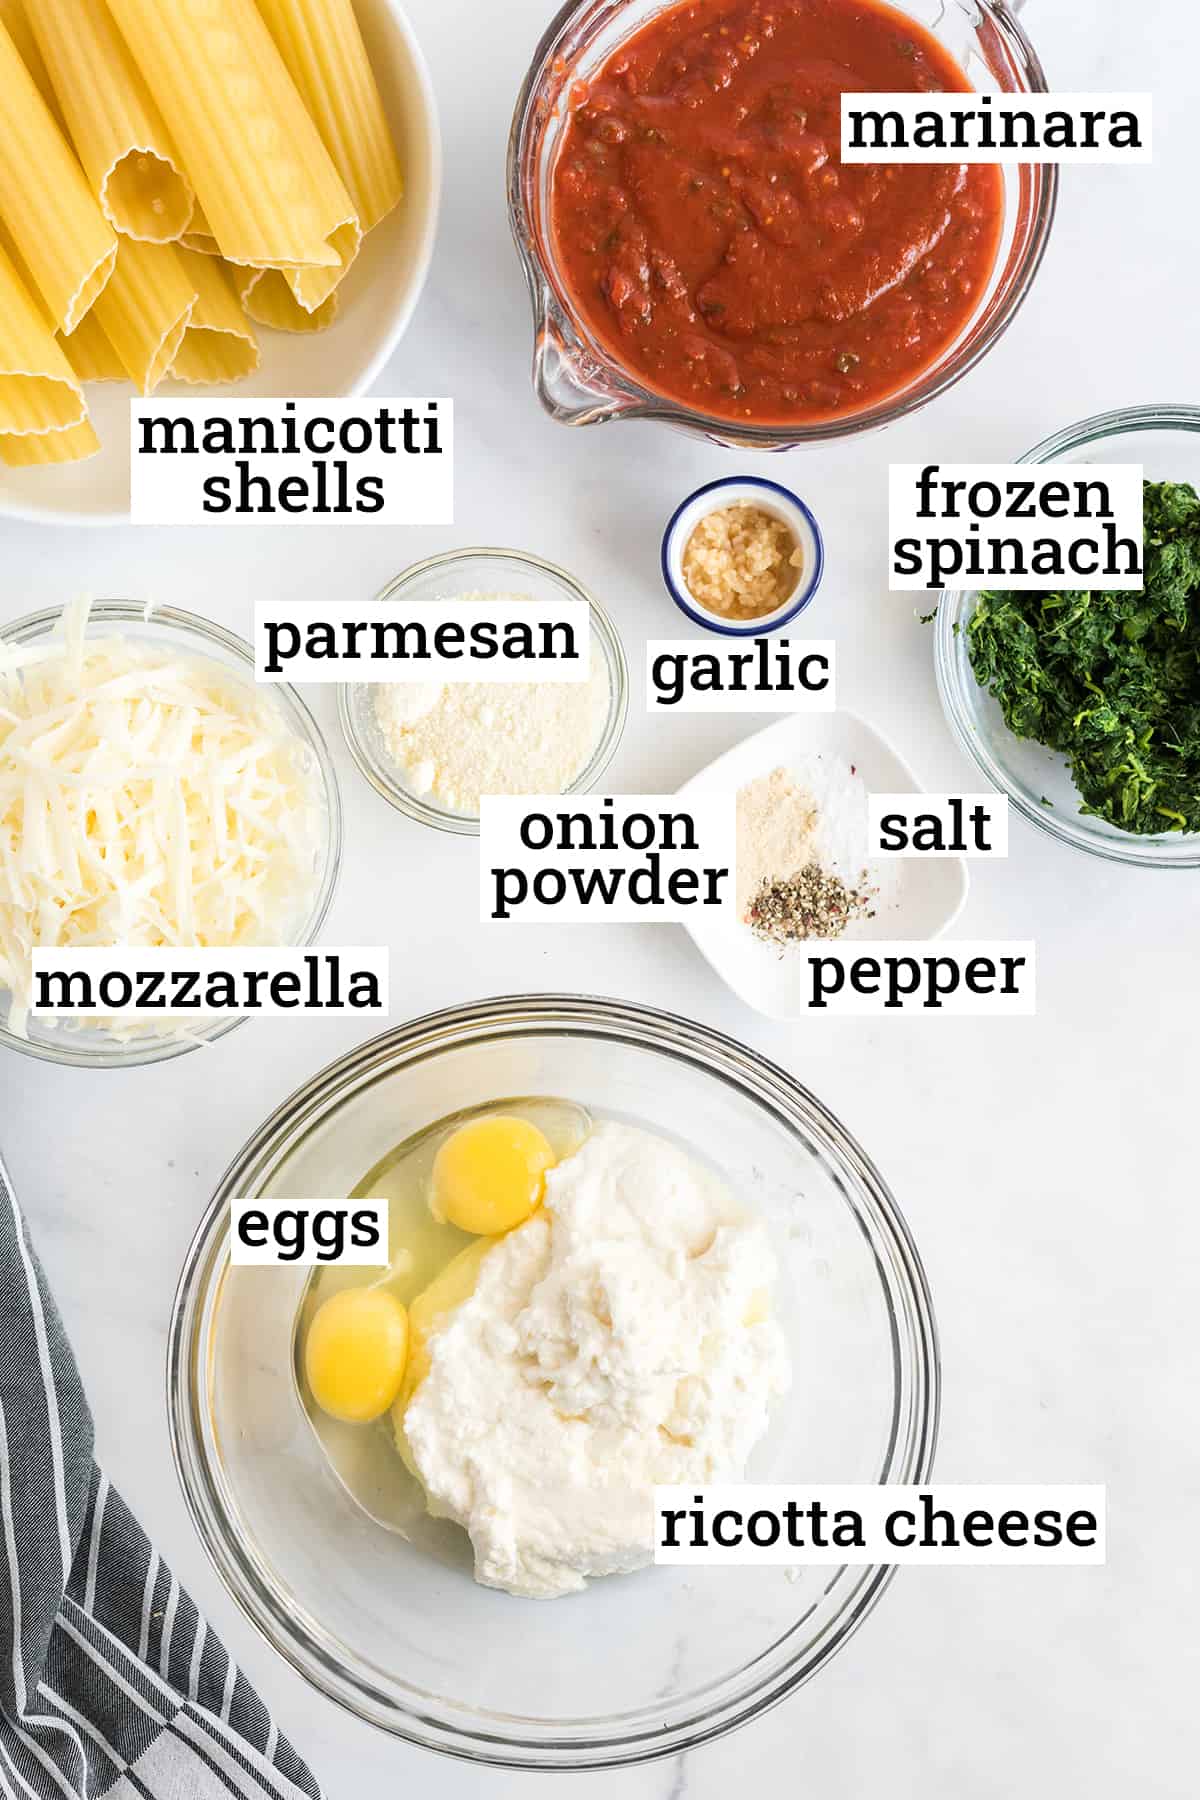 All the ingredients needed to make Manicotti with text overlay.